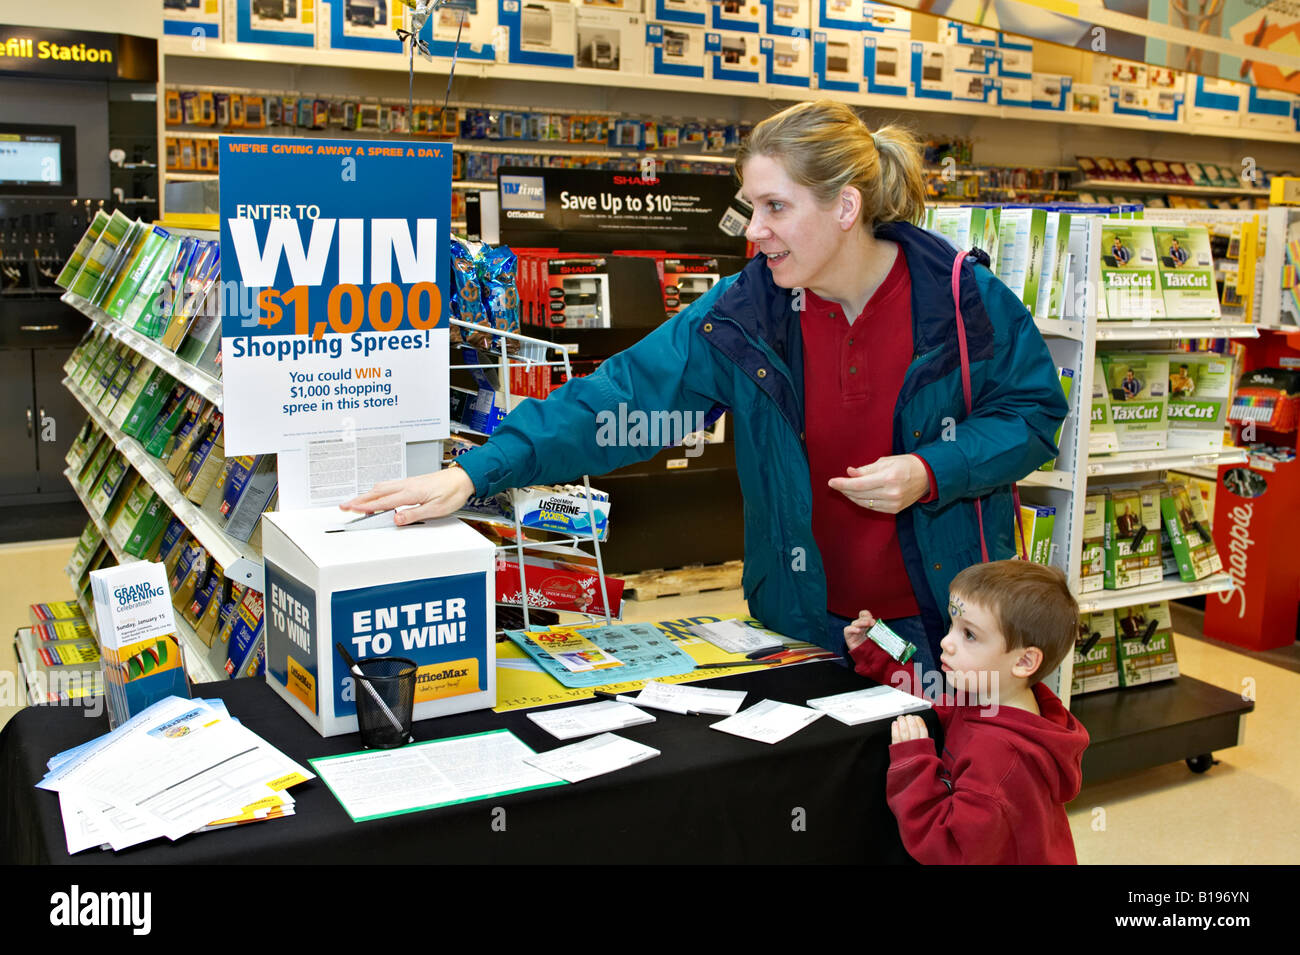 EVENTS Algonquin Illinois Woman with young boy place sweepstakes entry form in box at OfficeMax retail store grand opening Stock Photo